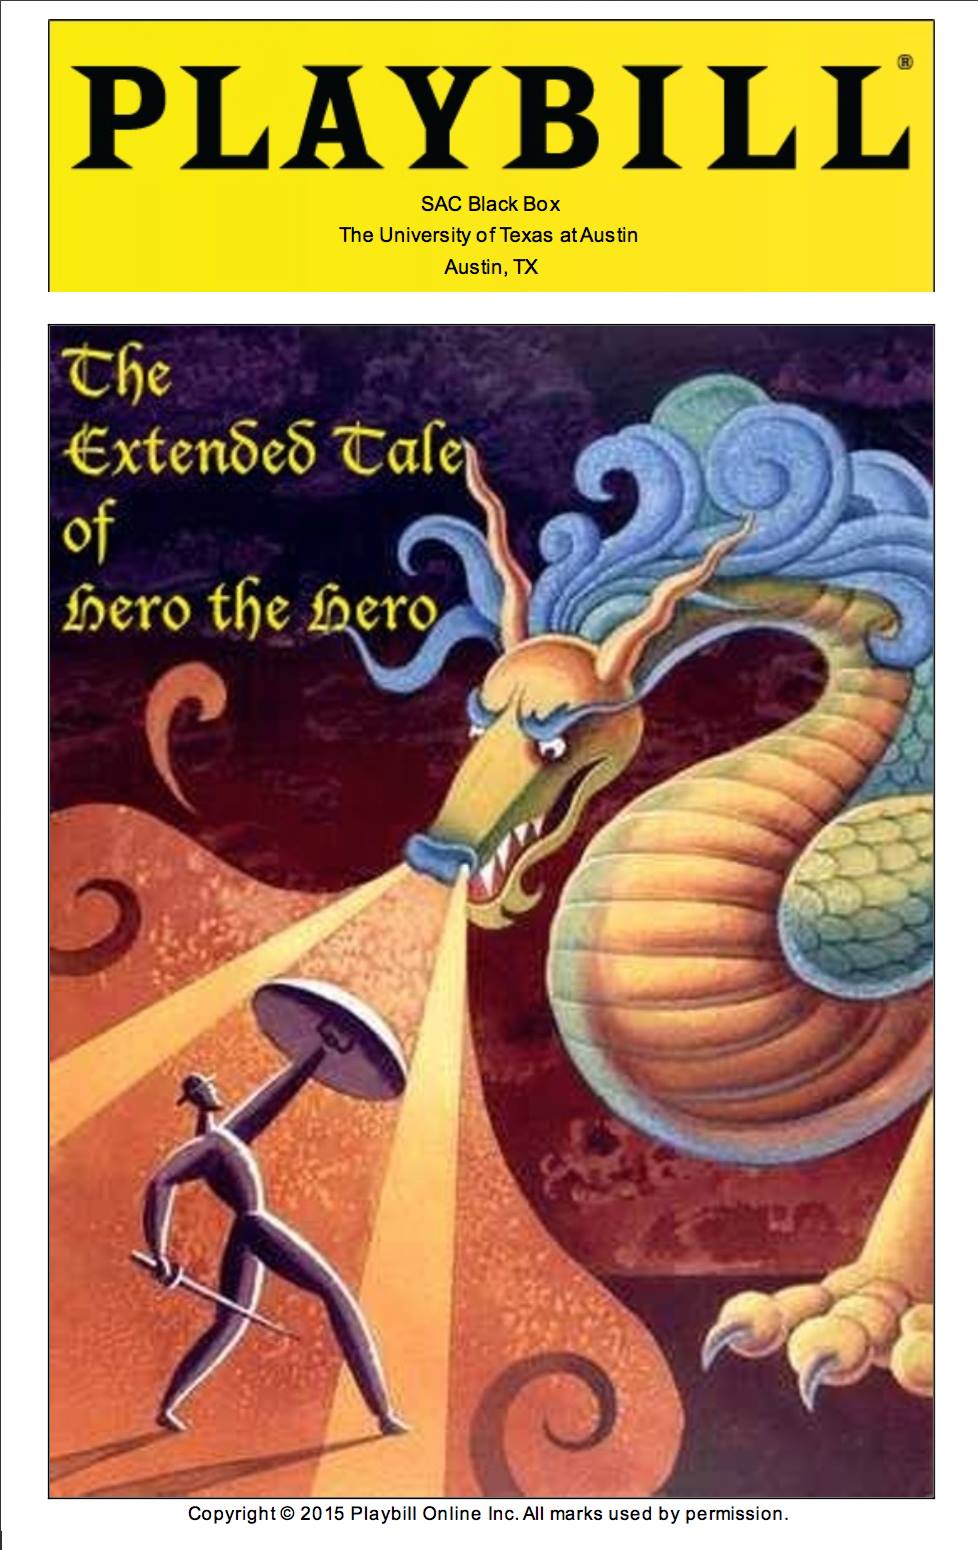 The Extended Tale of Hero The Hero  by Alpha Psi Omega at University of Texas in Austin